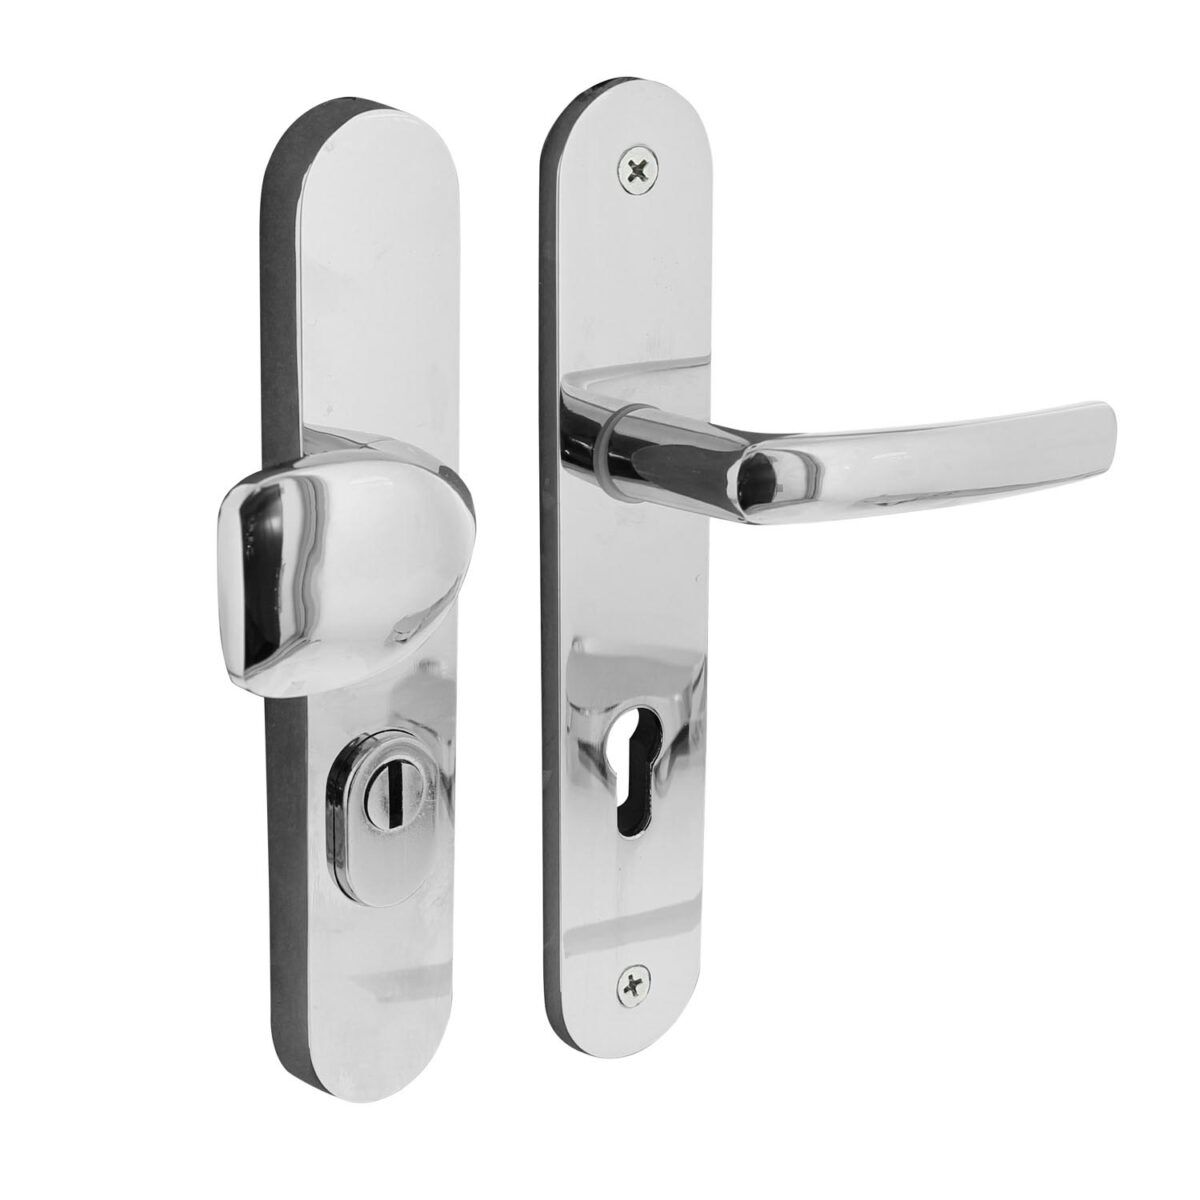 security fitting with core pulling protection security fitting with core pulling protection 0016383036-oval-core pulling protection-chrome-front door shield